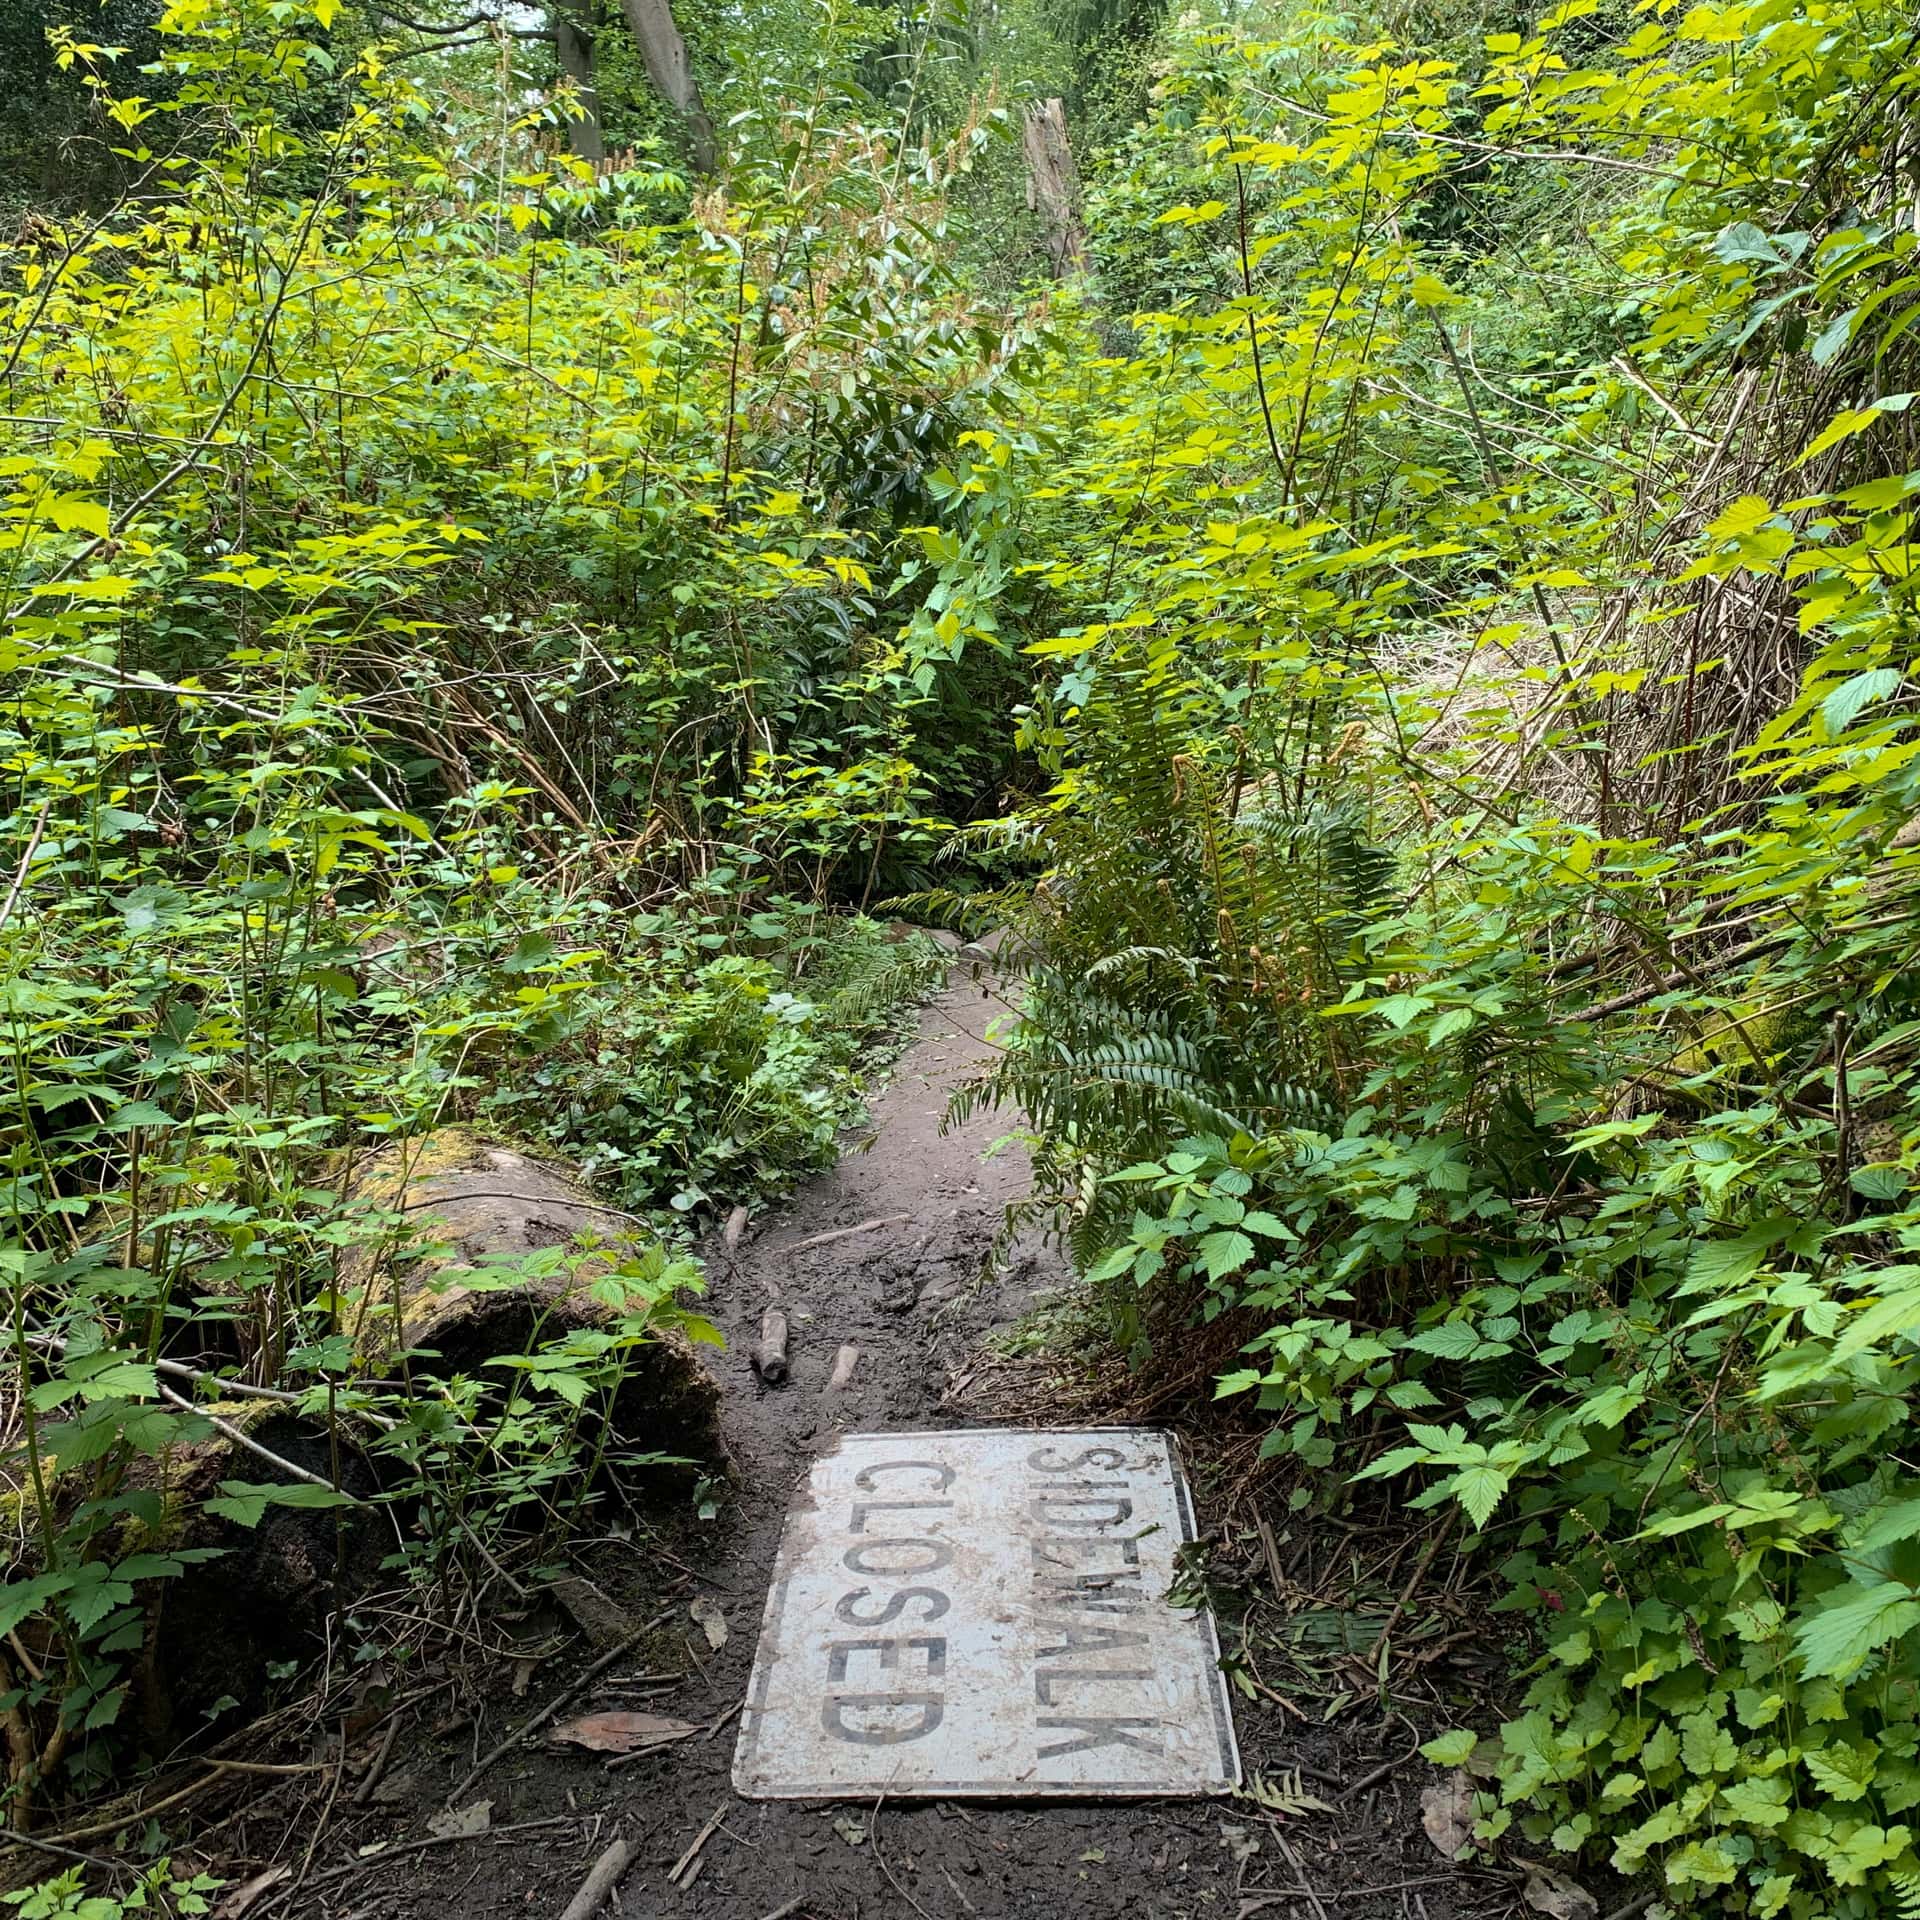 a metal street sign reading “Sidewalk Closed” lays in the mud, repurposed as a stepping stone